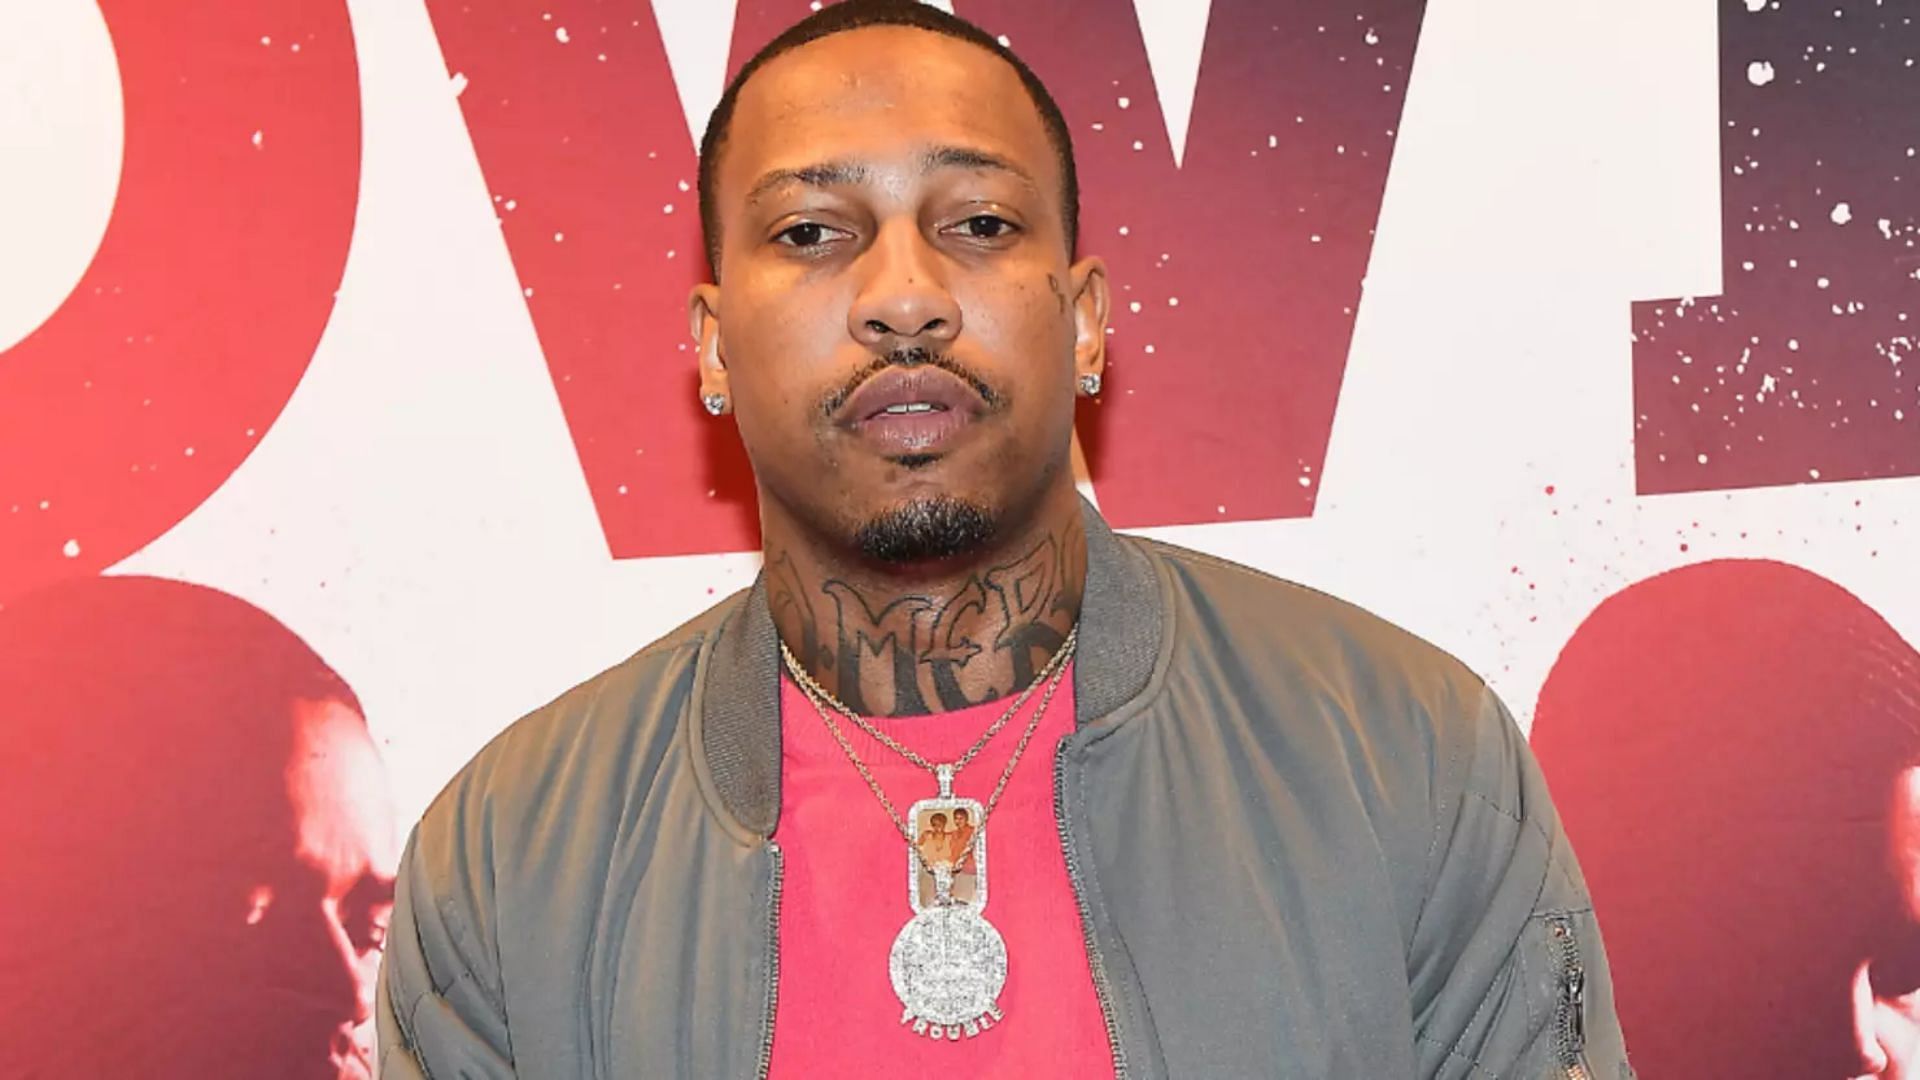 Atlanta Rapper Trouble Reportedly Shot &amp; Killed At 35 ( Image via Getty Images)